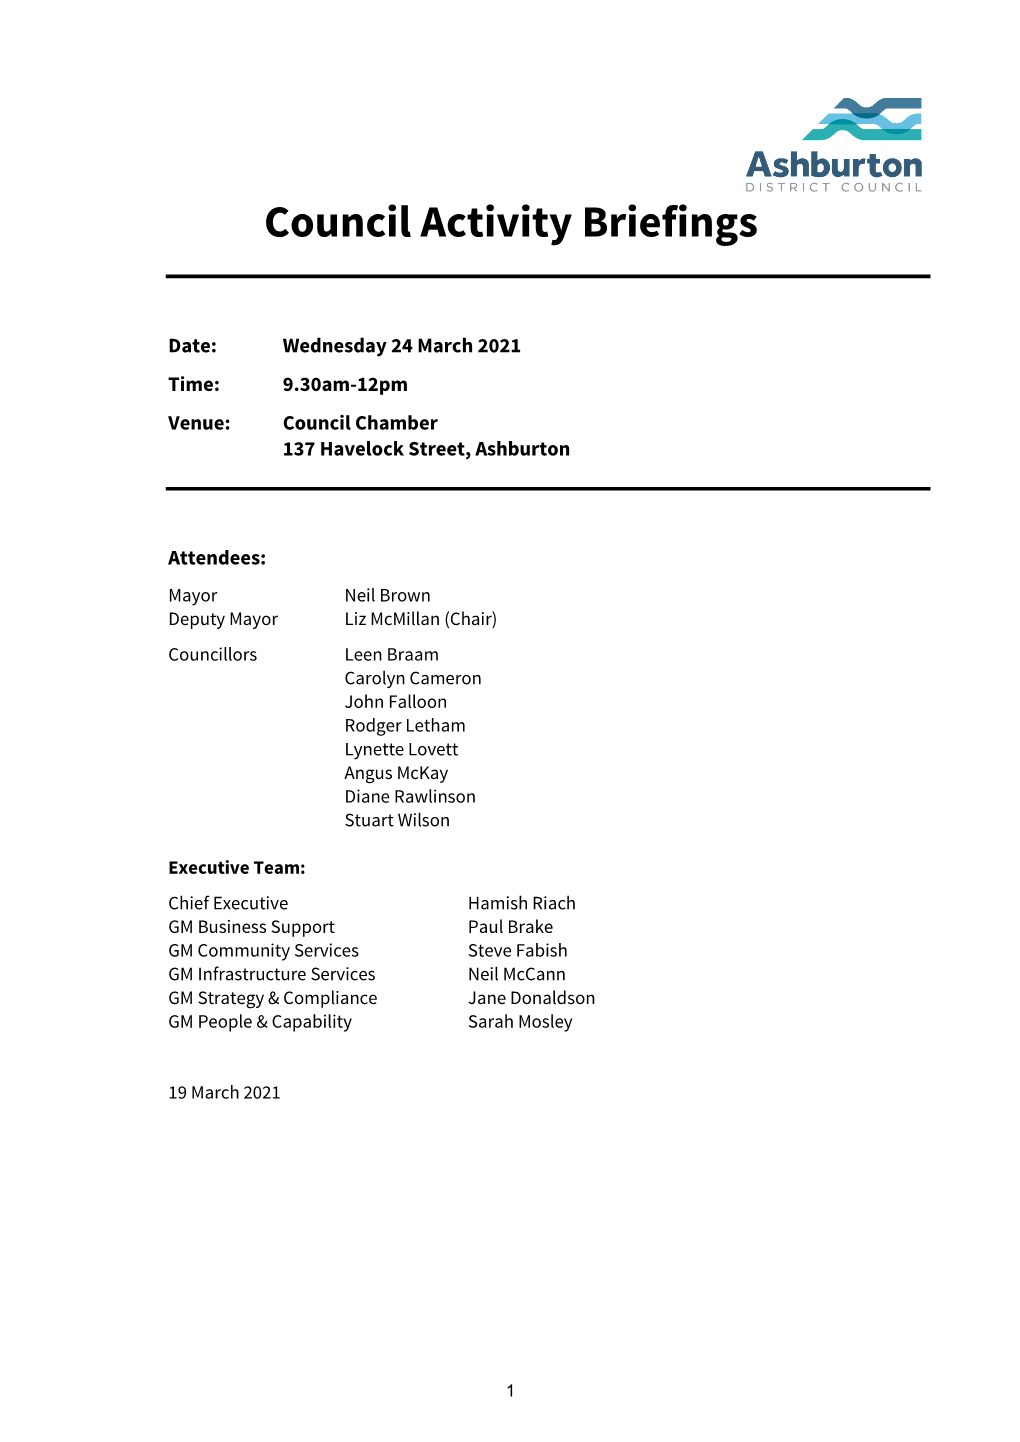 Council Activity Briefings 24 March 2021